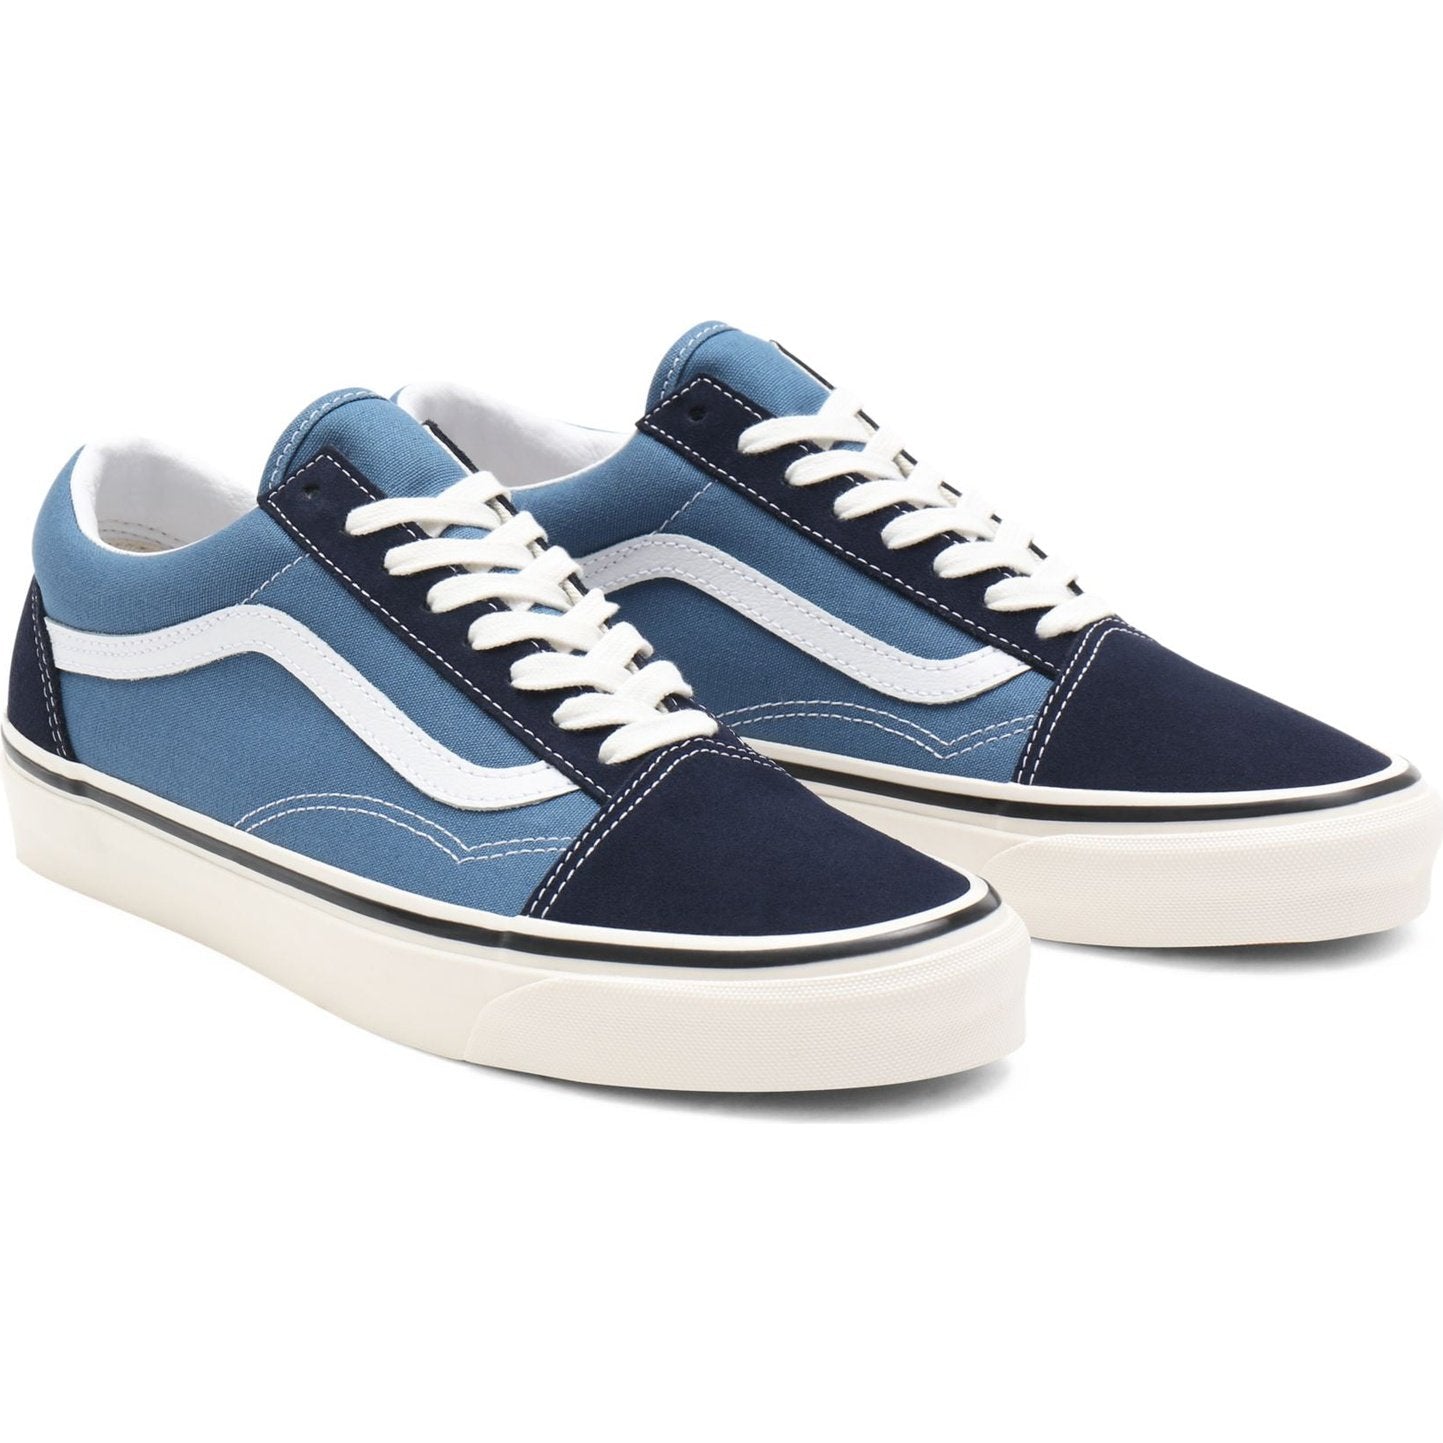 Intercambiar tonto Polvoriento Anaheim Factory Old Skool 36 DX Shoes – Sporty Pro